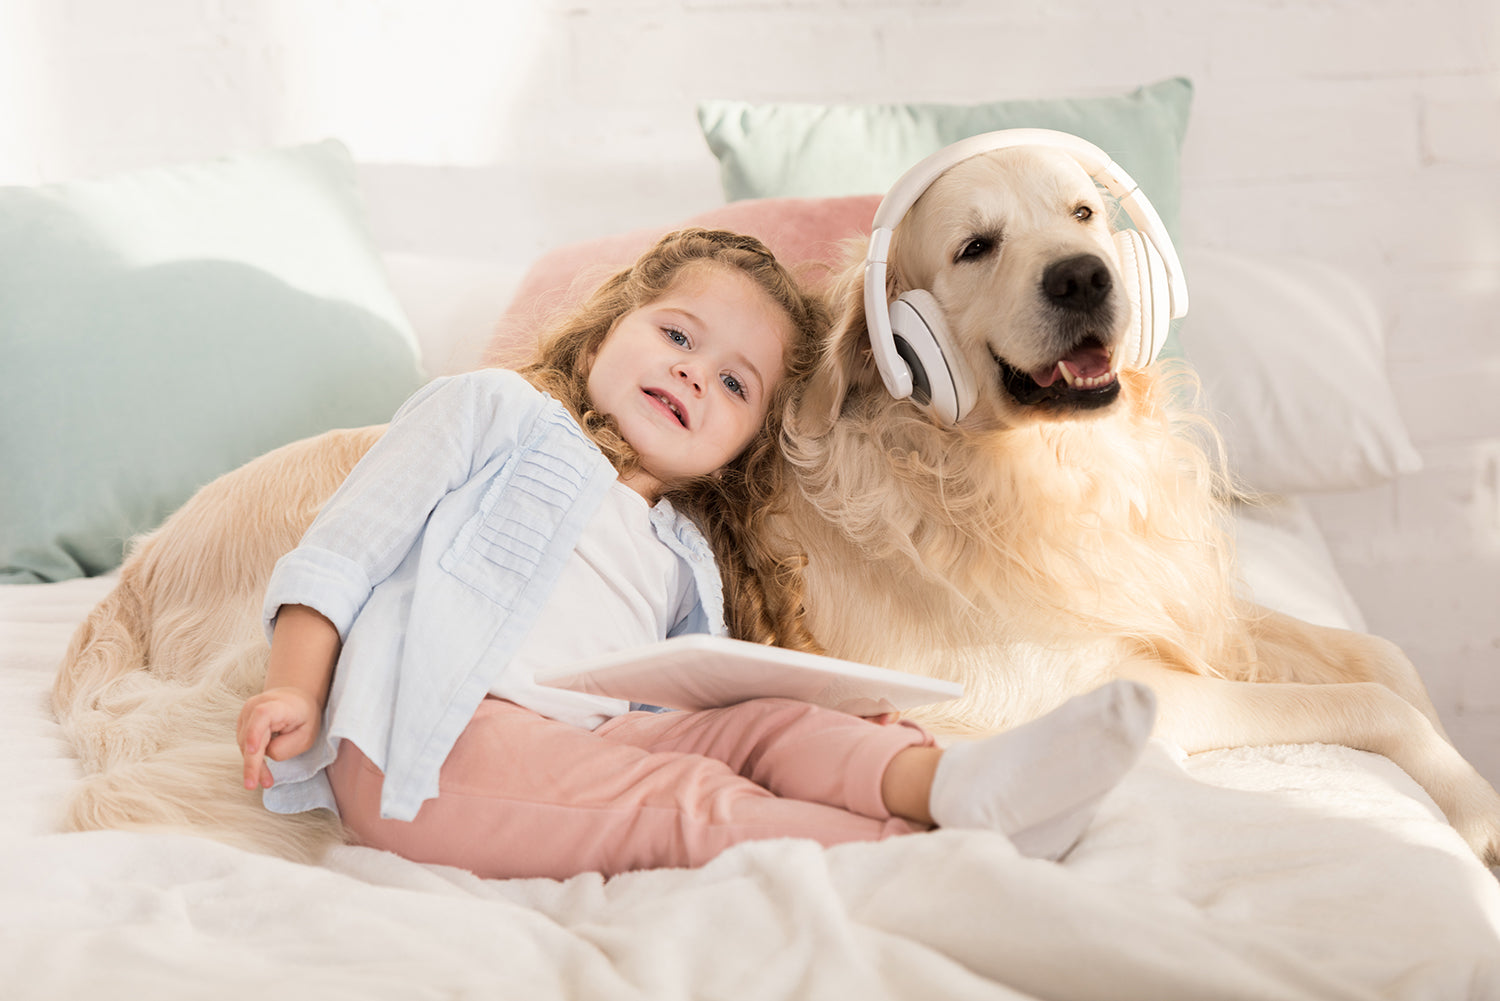 little girl in pink pants lying on bed next to golden retriever dog wearing headphones